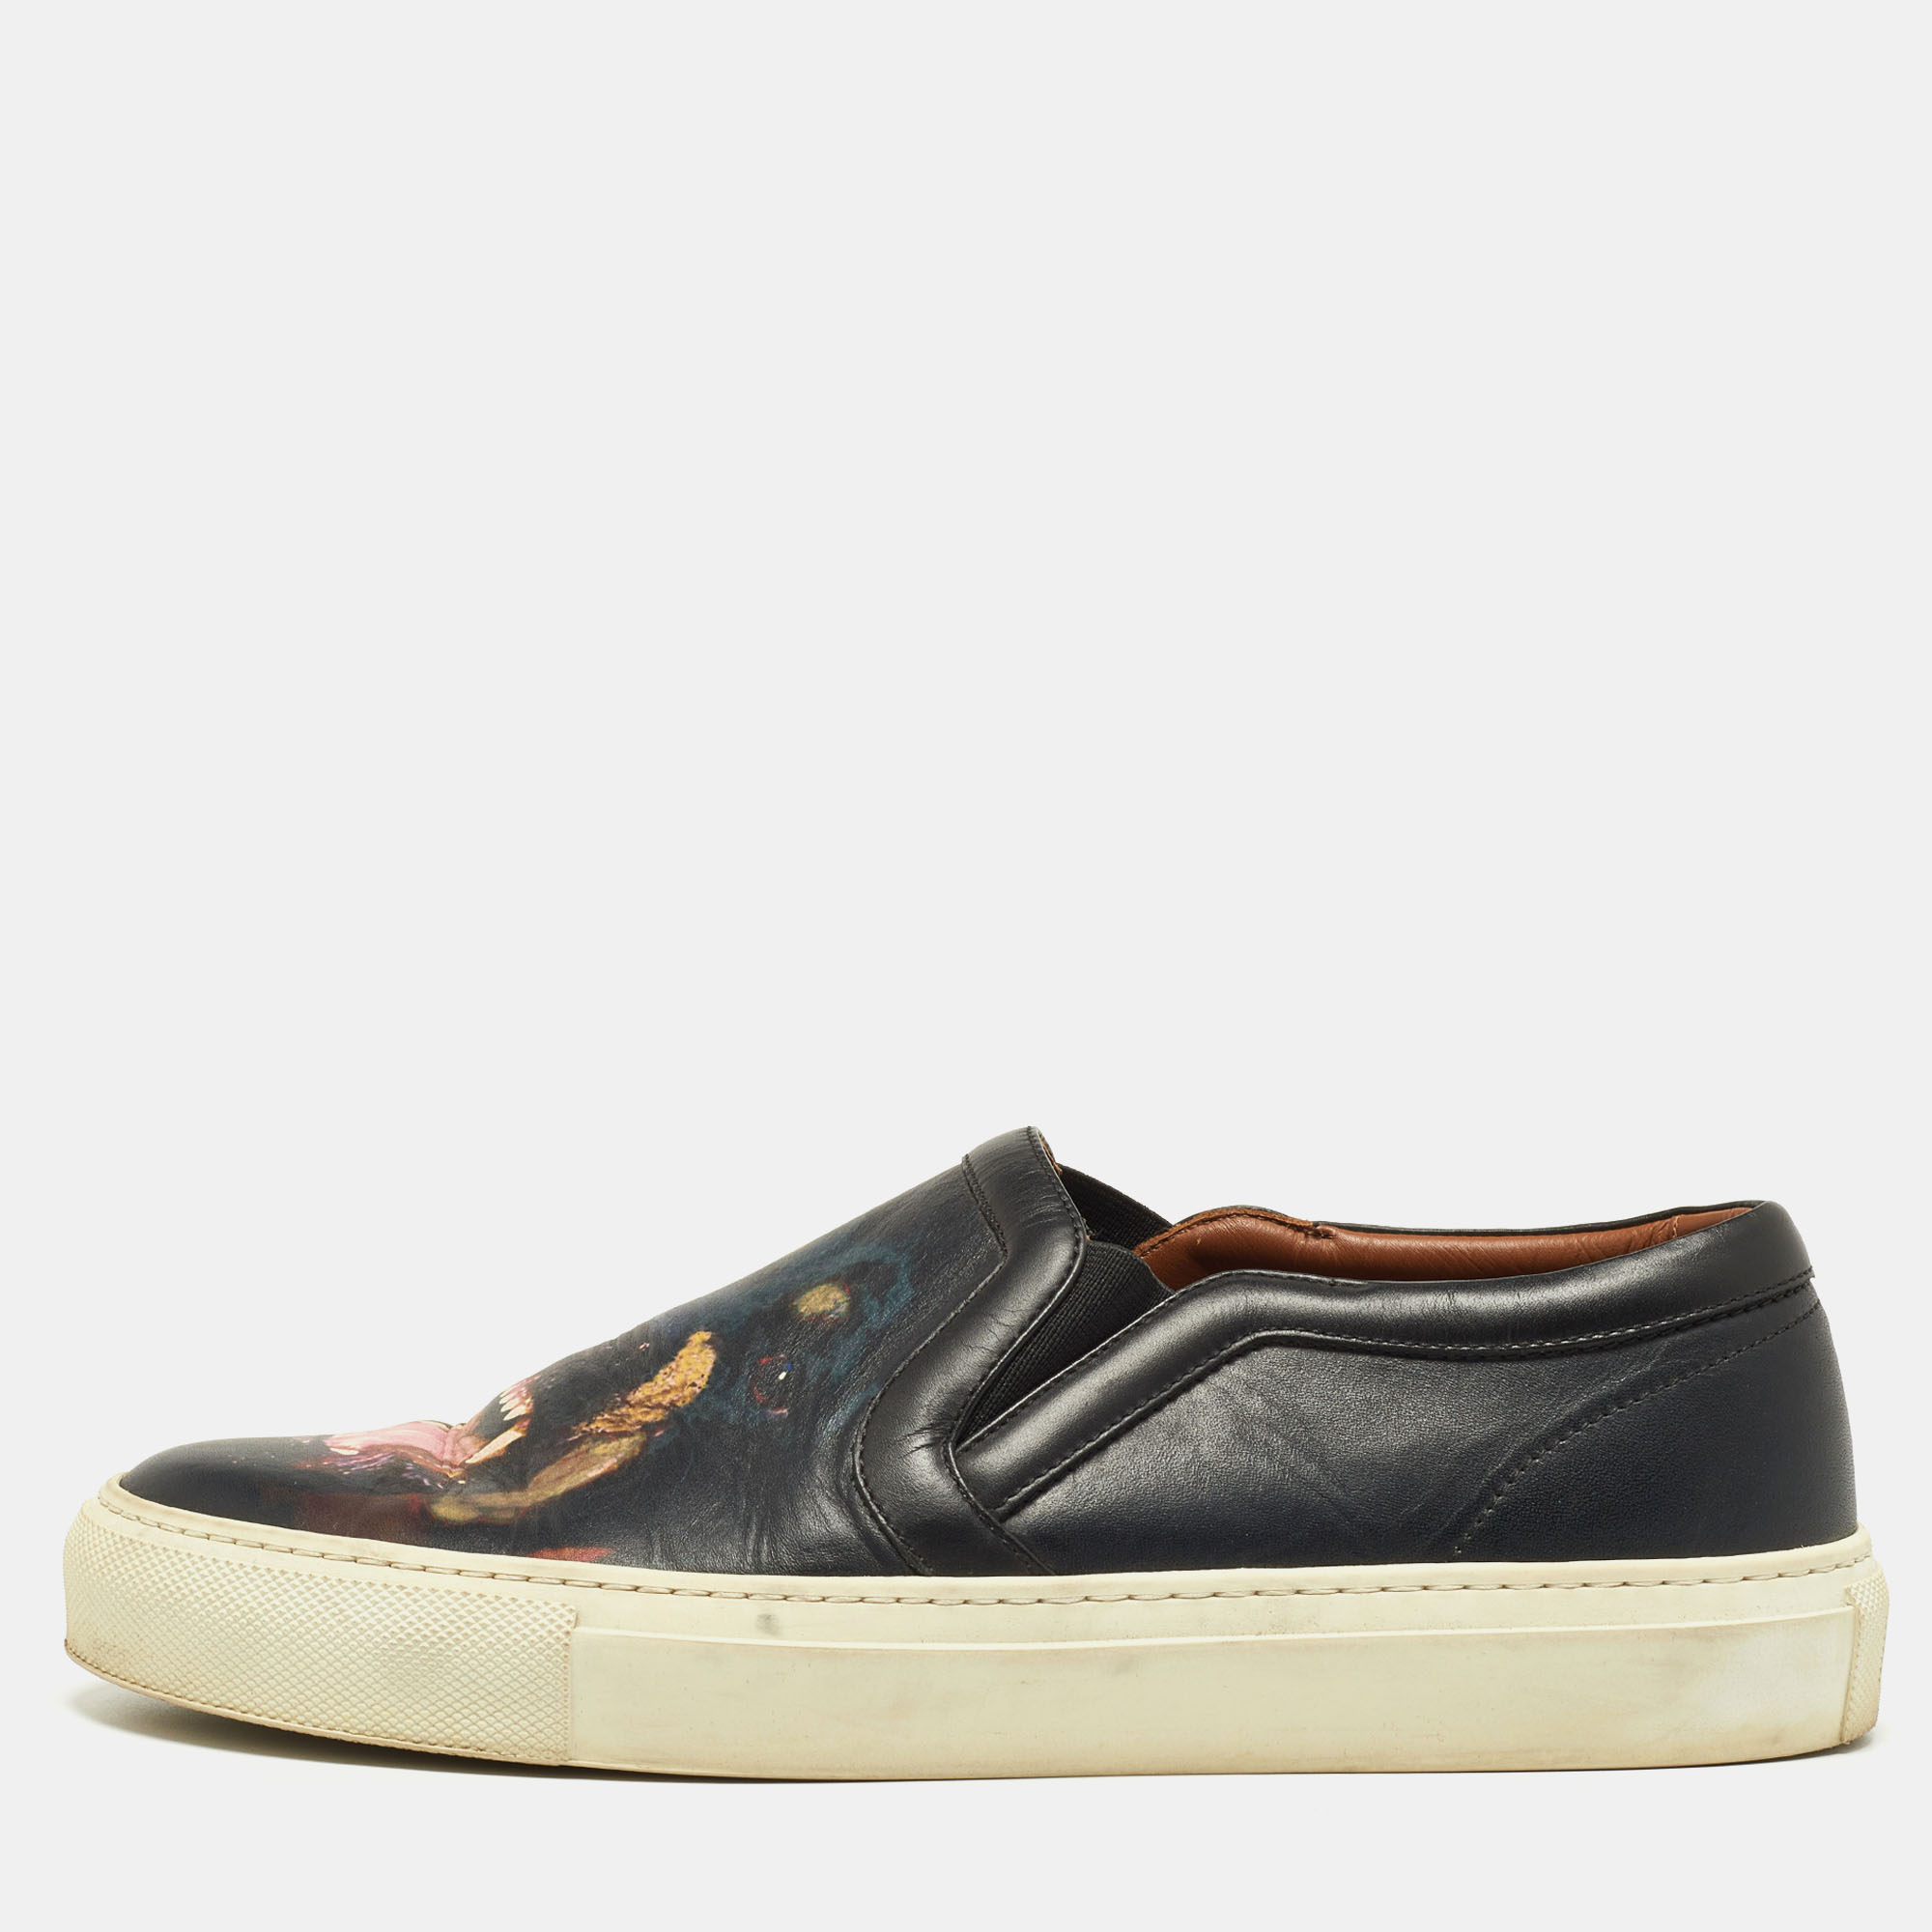 Pre-owned Givenchy Black Leather Rottweiler Slip On Sneakers Size 39